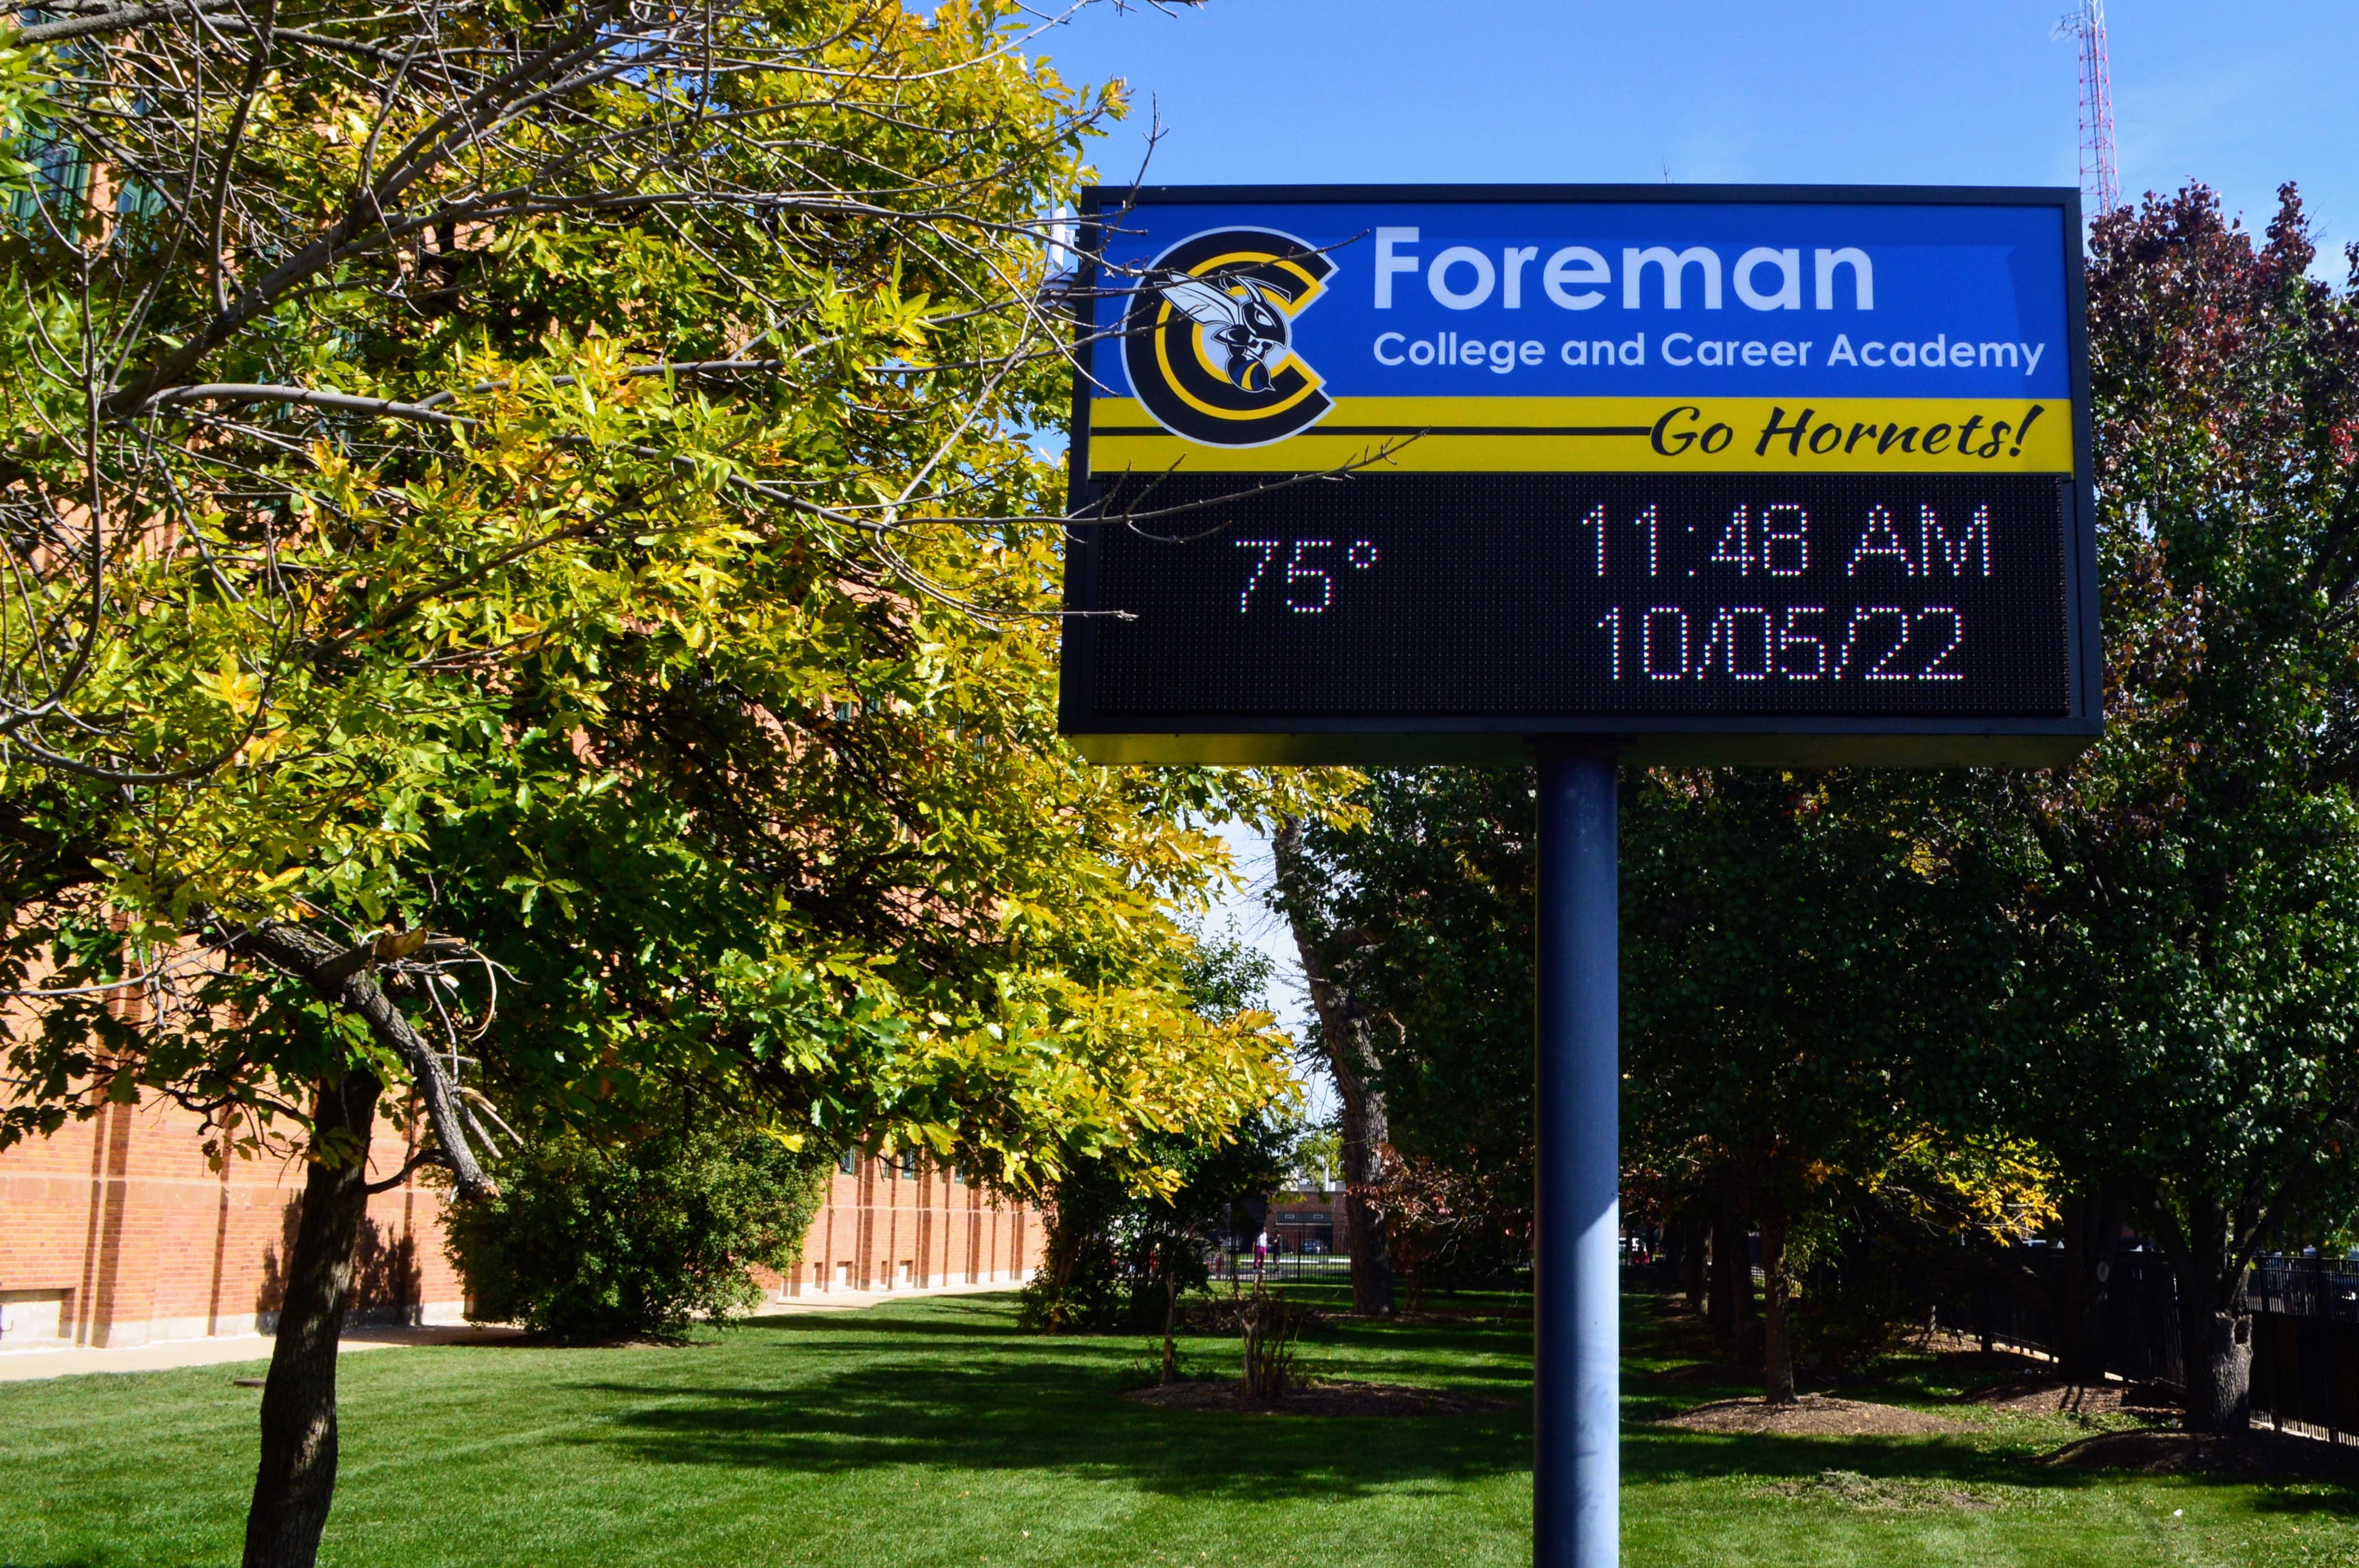 Foreman College and Career Academy sign displaying date and time